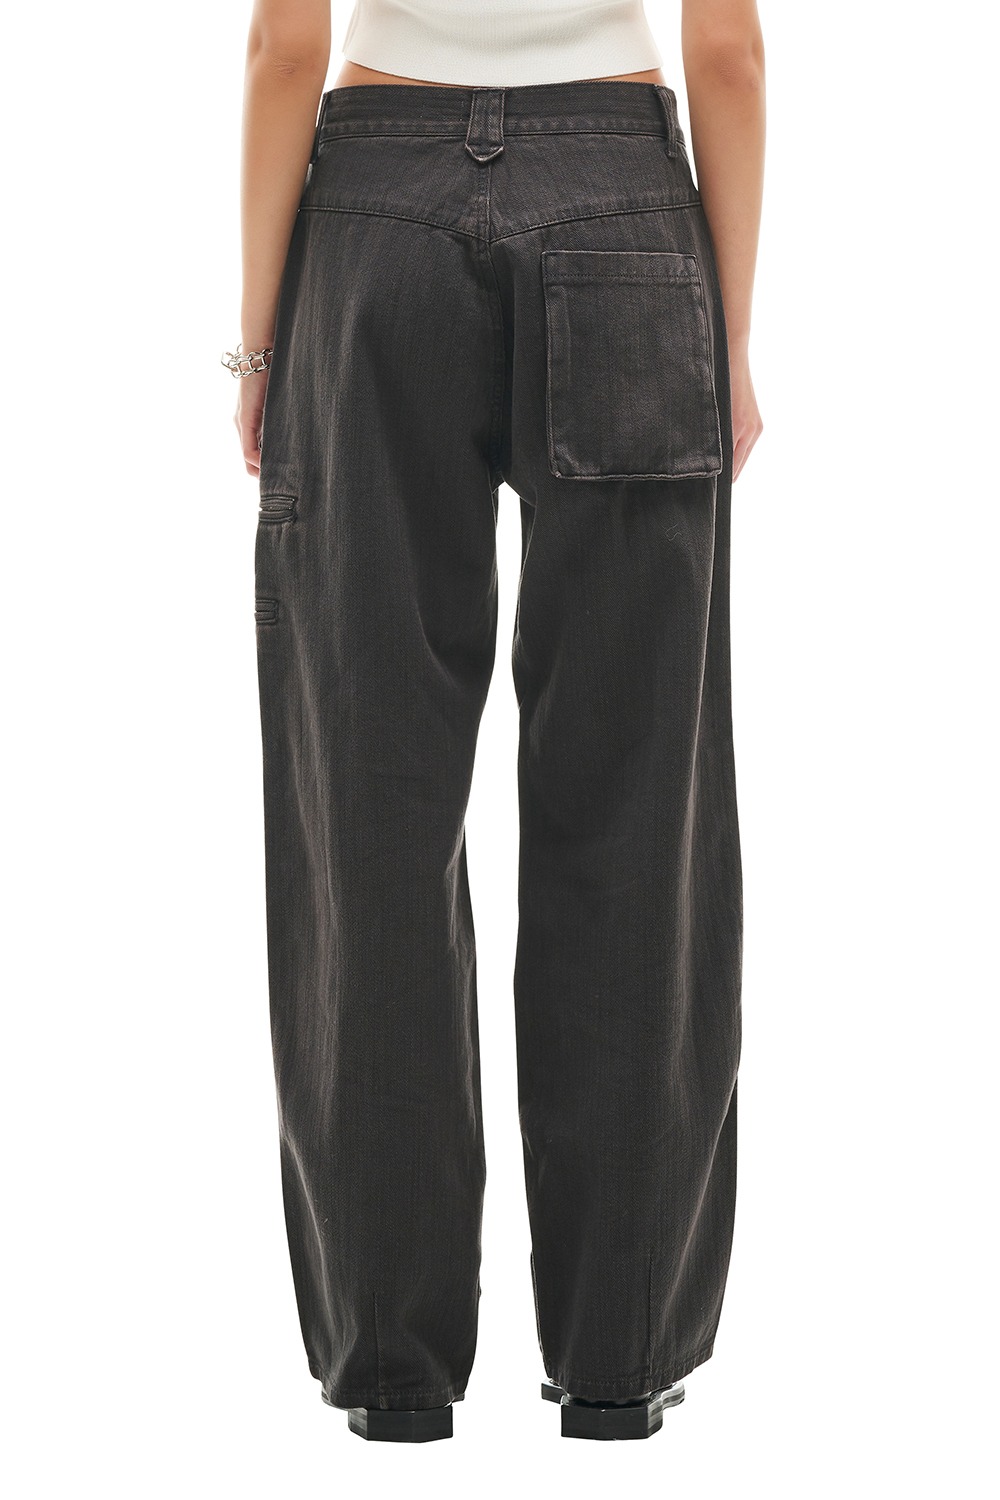 KENNY COLOR WASHED JEANS (CHARCOAL)